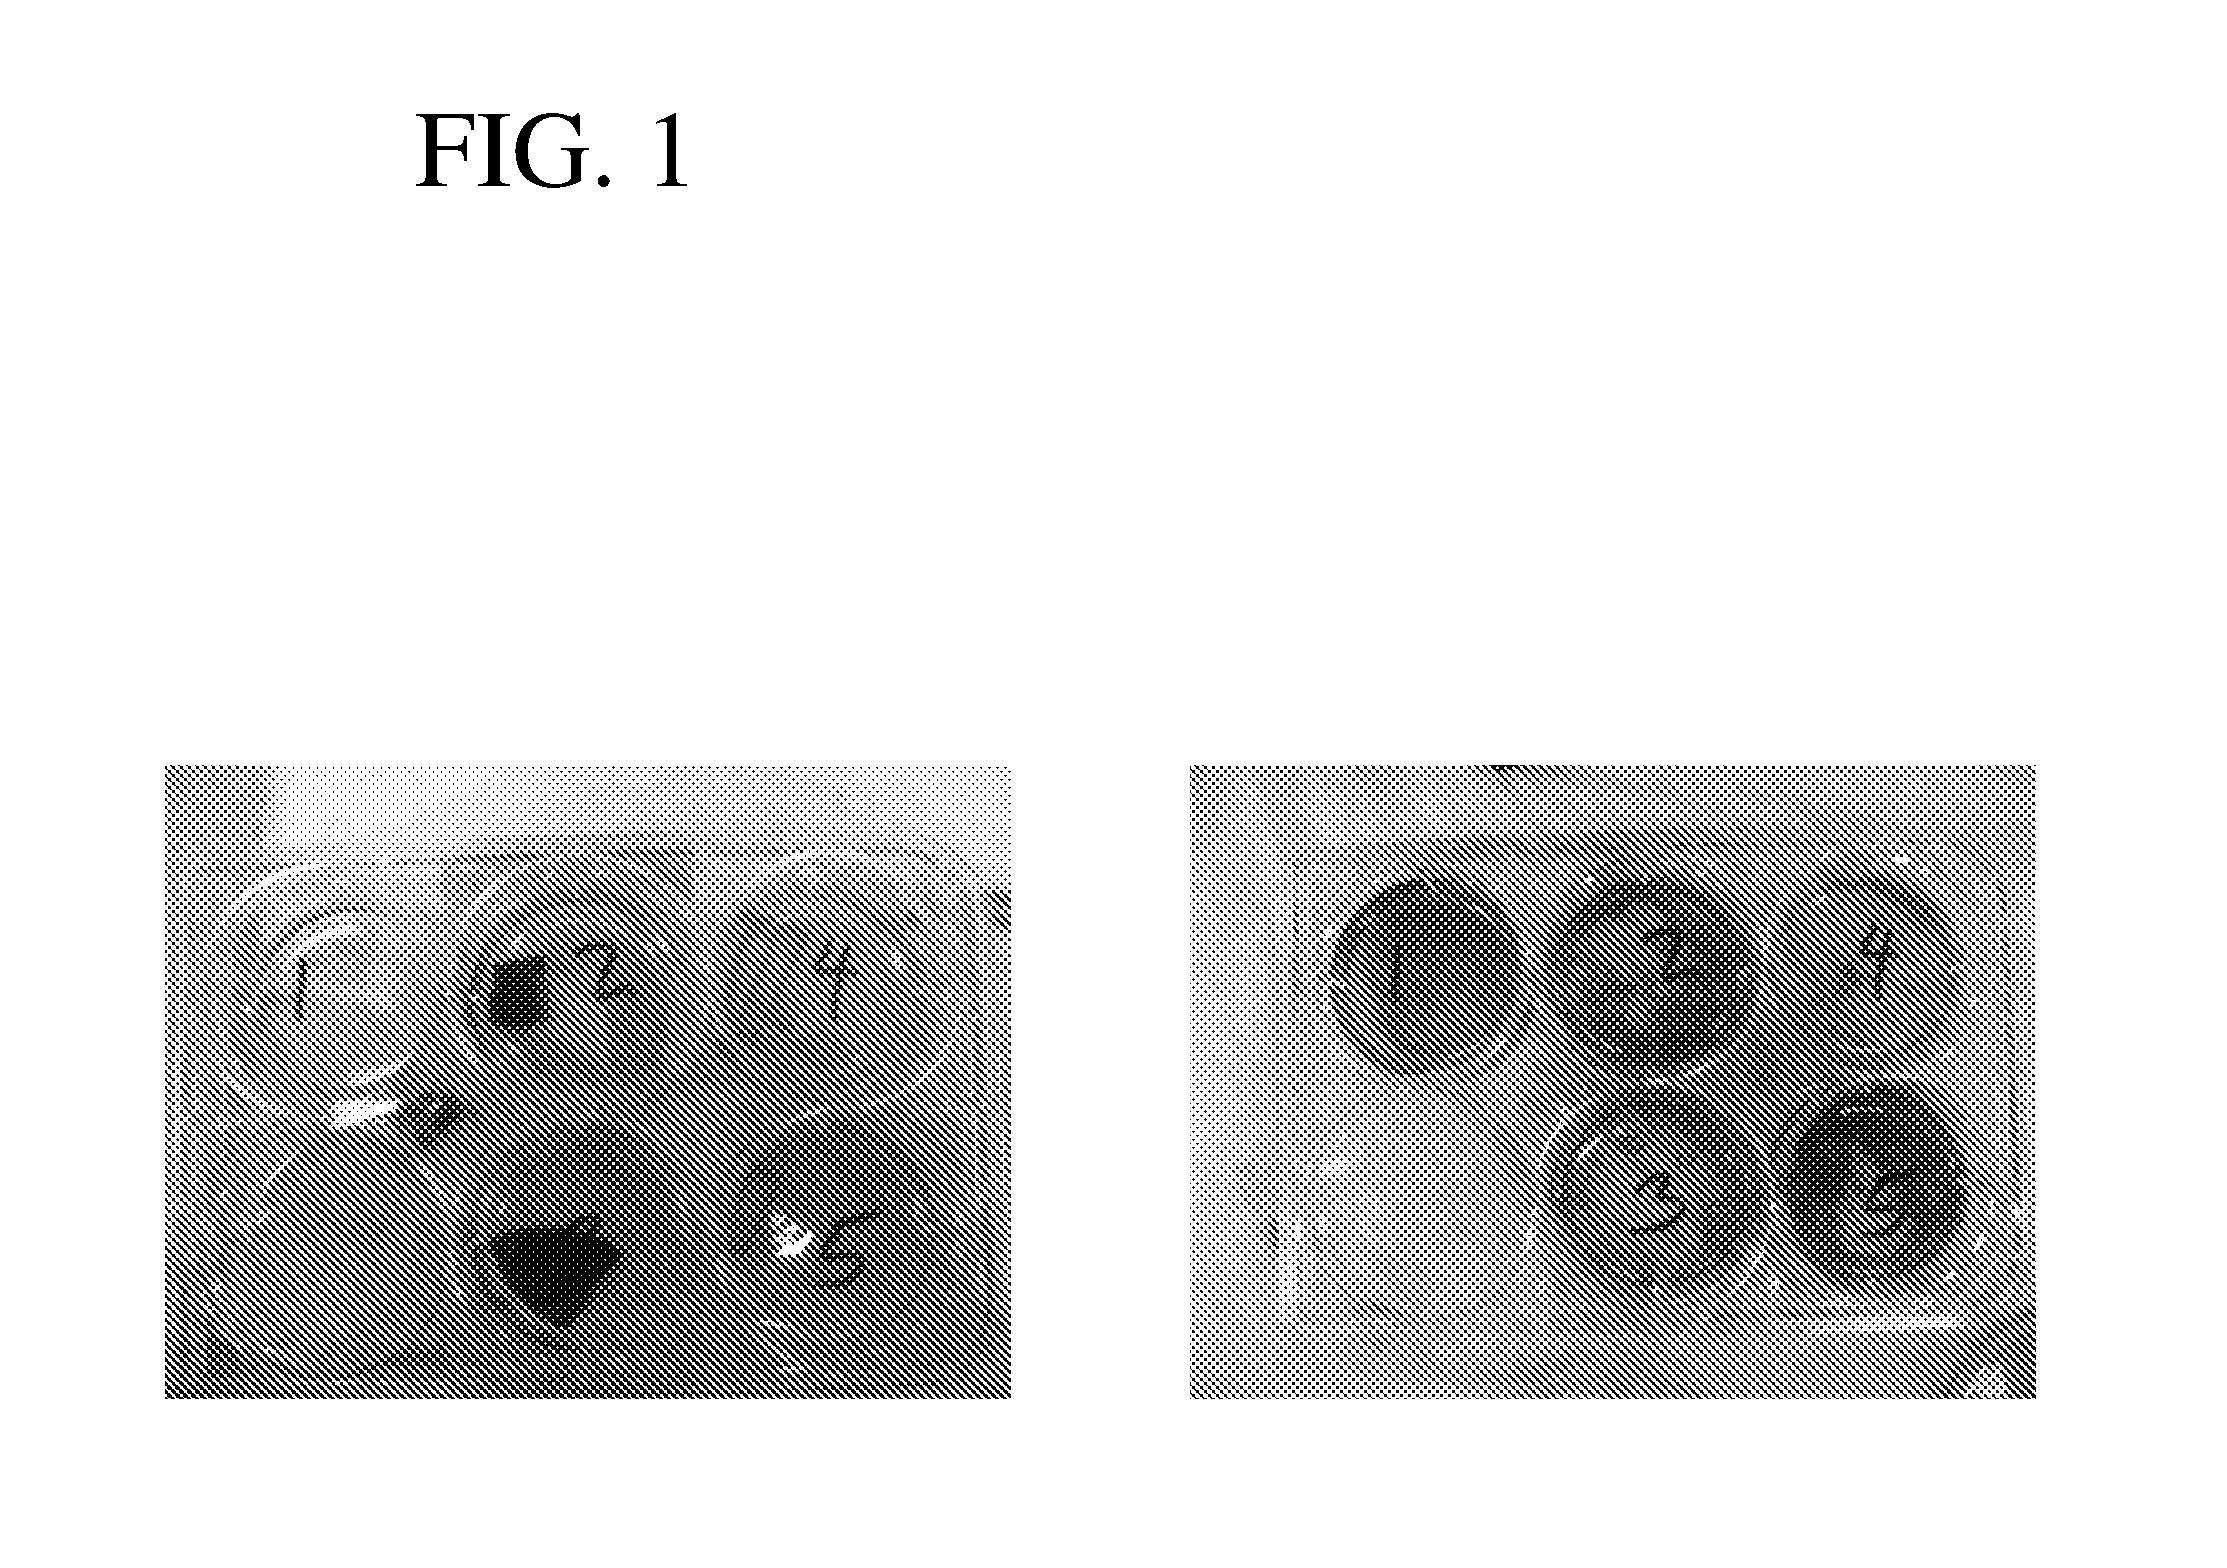 Cell growth apparatus and use of aerogels for directed cell growth